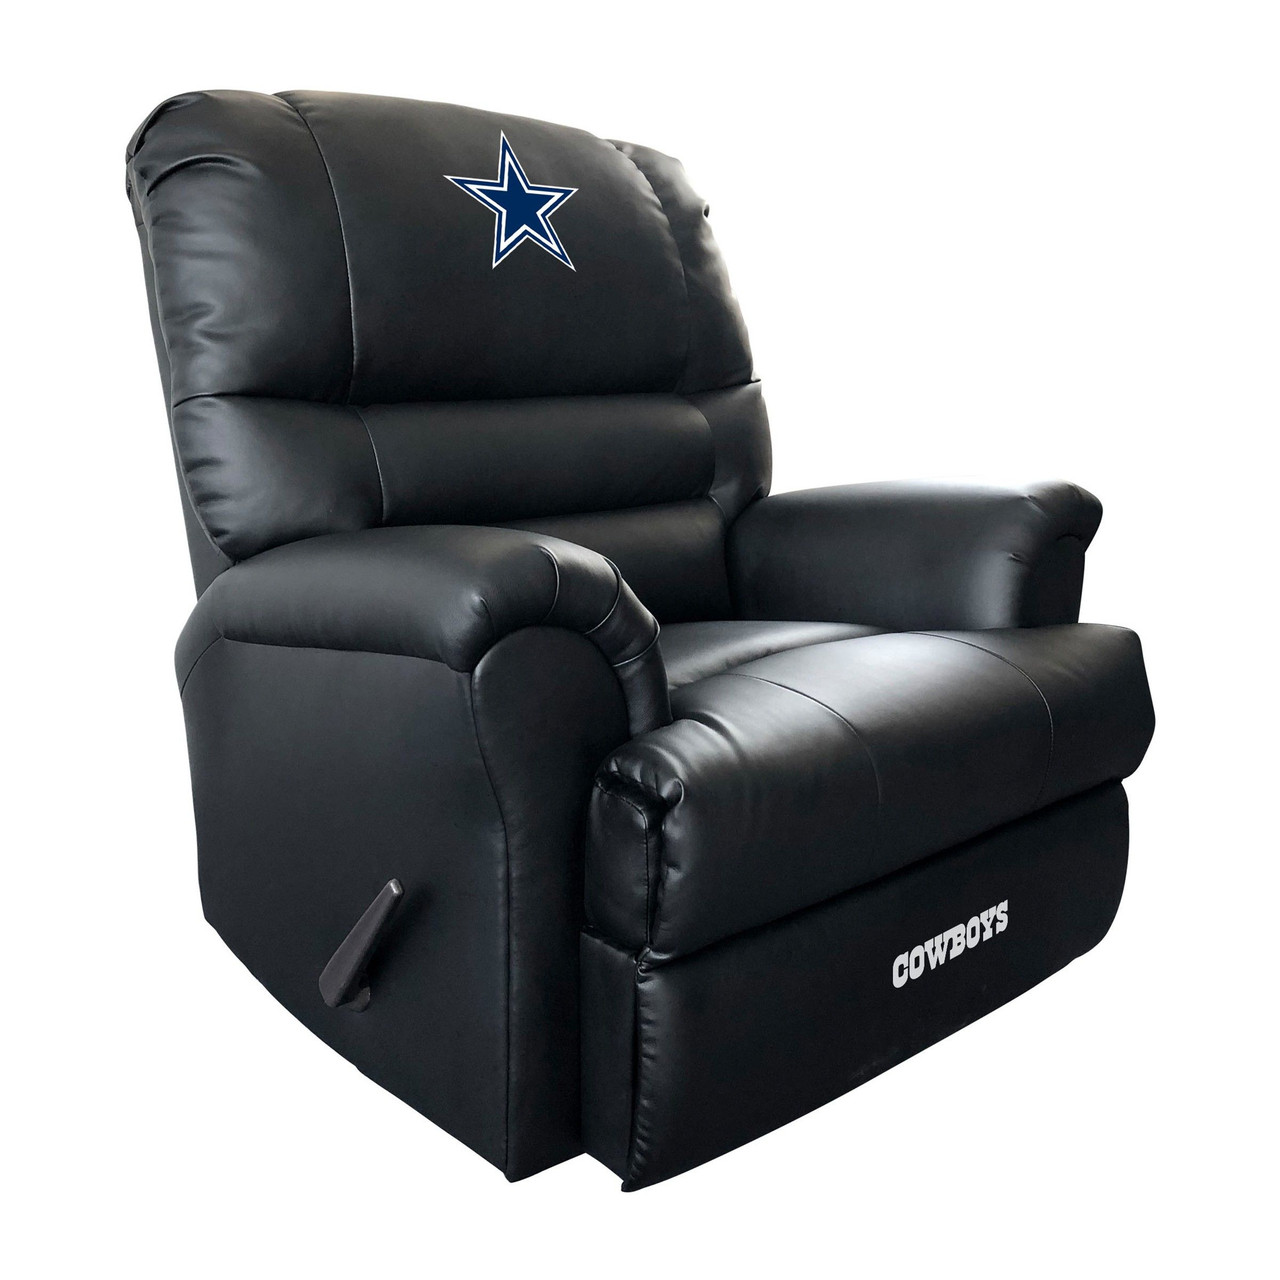 503-5002, Dallas, Cowboys, DAL, Sports, Leather, Faux, Recliner, Comfortable, NFL, Imperial, 720801535029